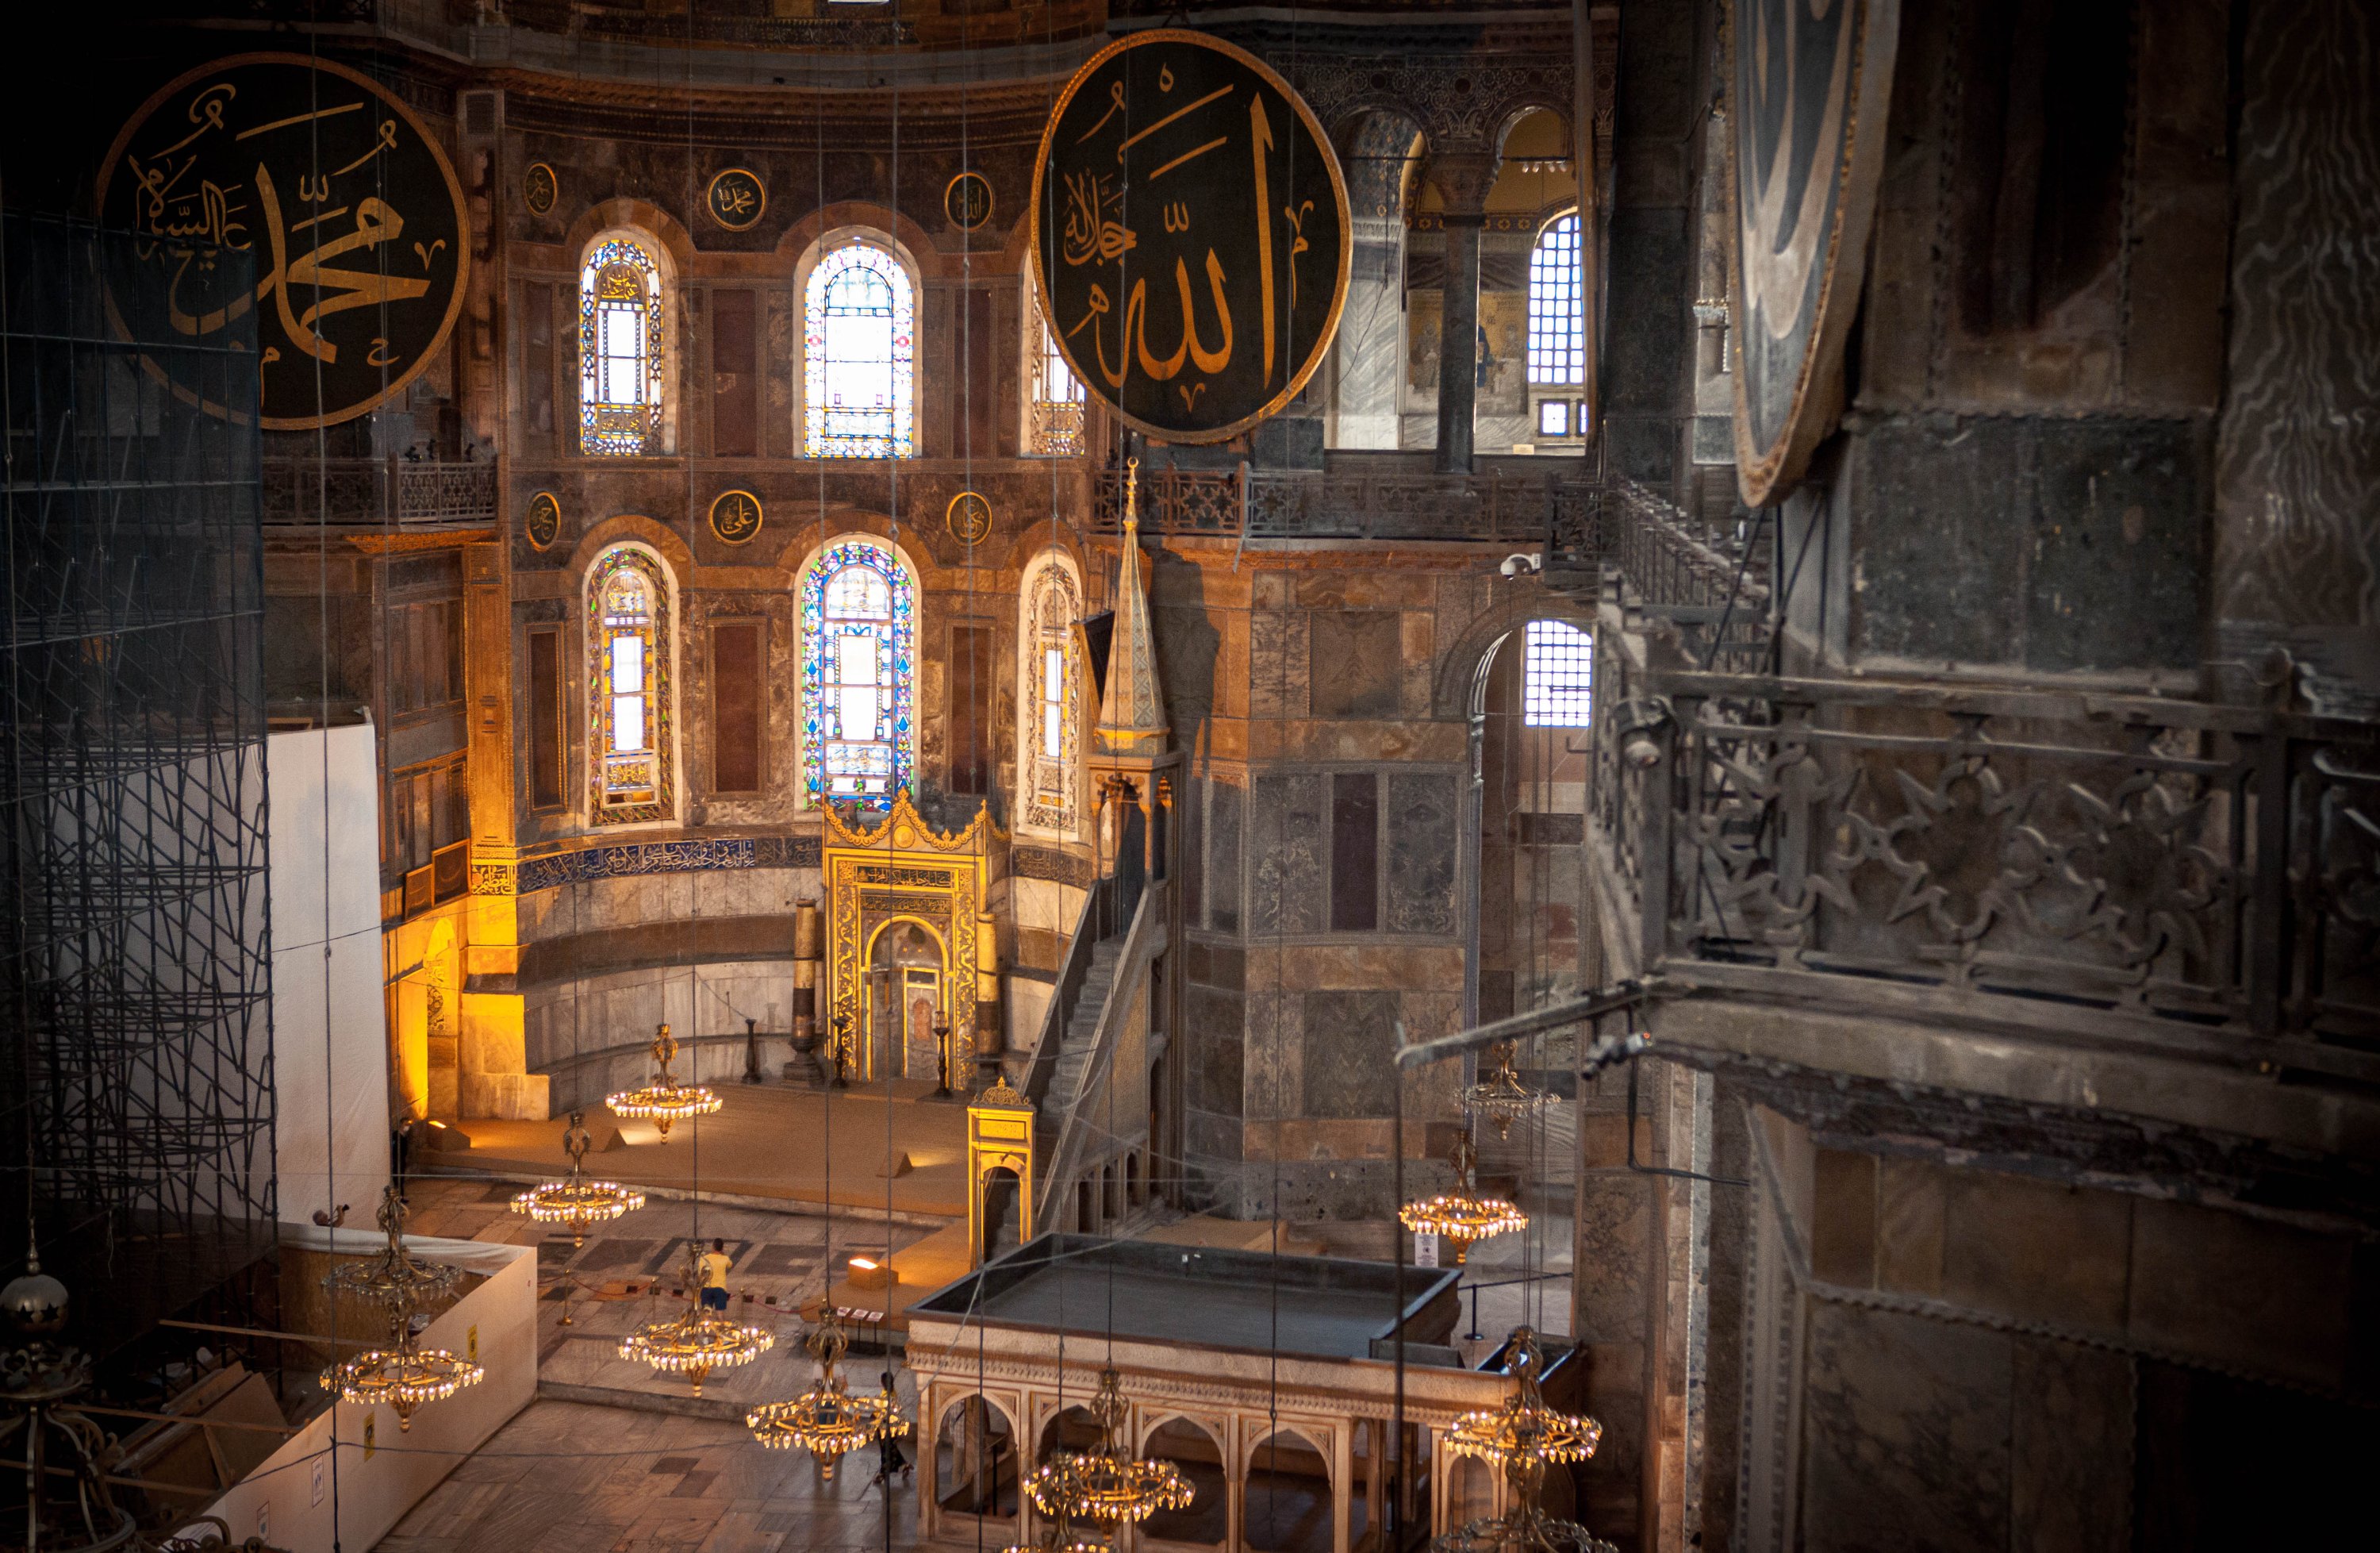 A photo from the interior of Hagia Sophia. (Photo by Hatice Çınar)